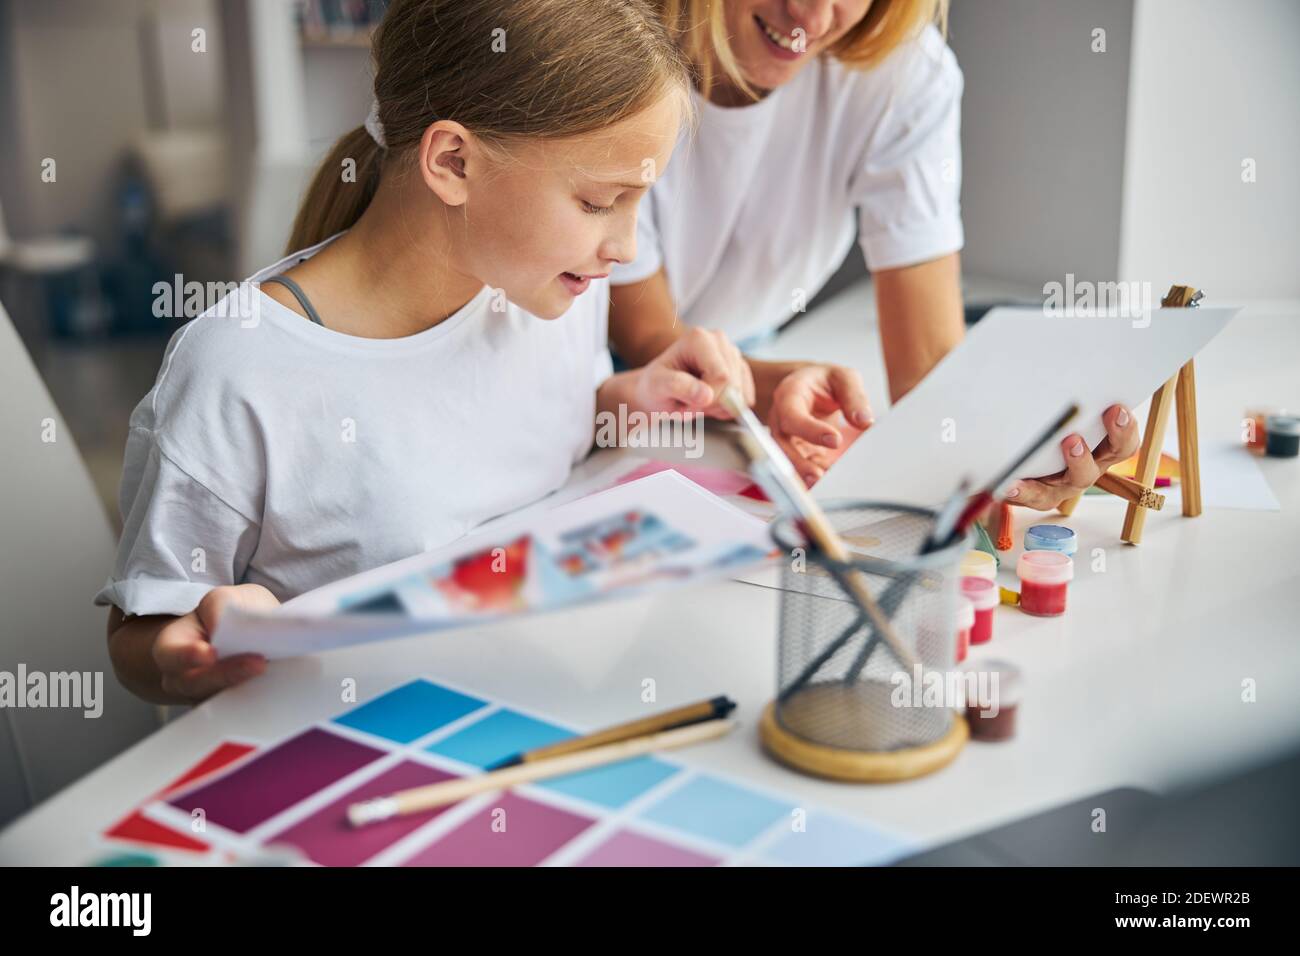 Daughter and her mother scrutinizing fashion sketches Stock Photo